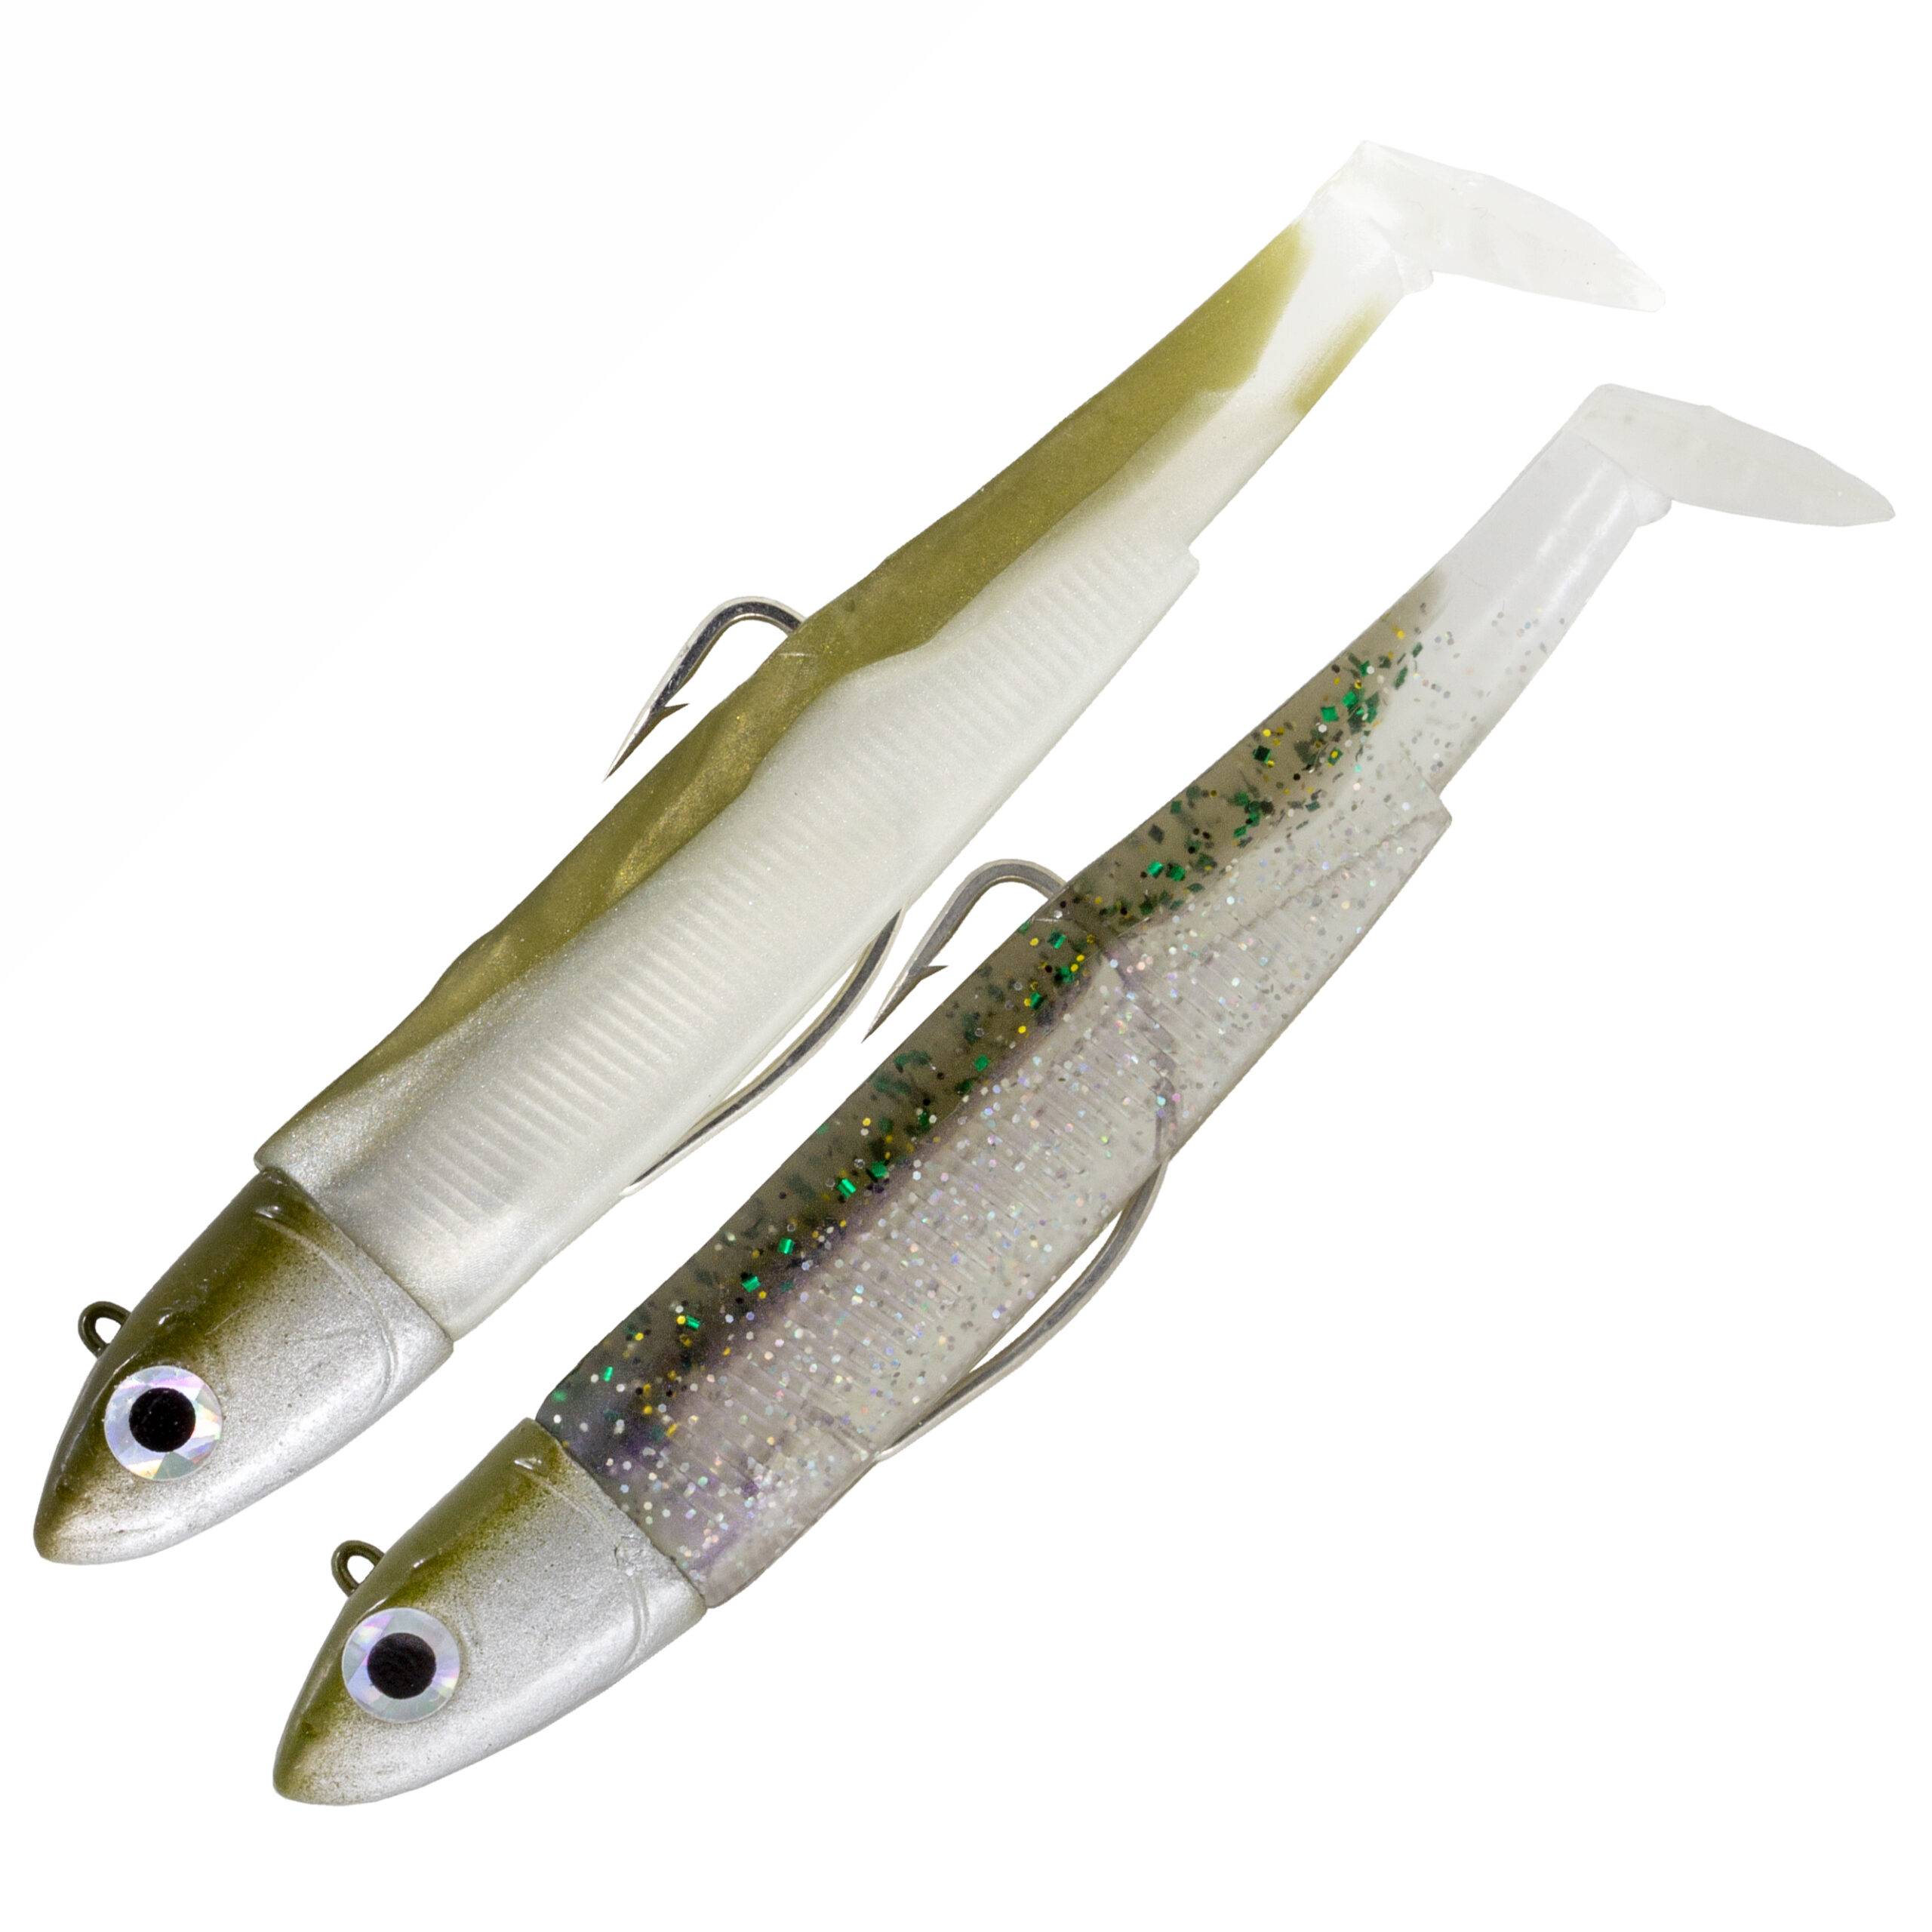 Fiiish Black Minnow 120 No3 25gm Offshore Double Combo - Veals Mail Order